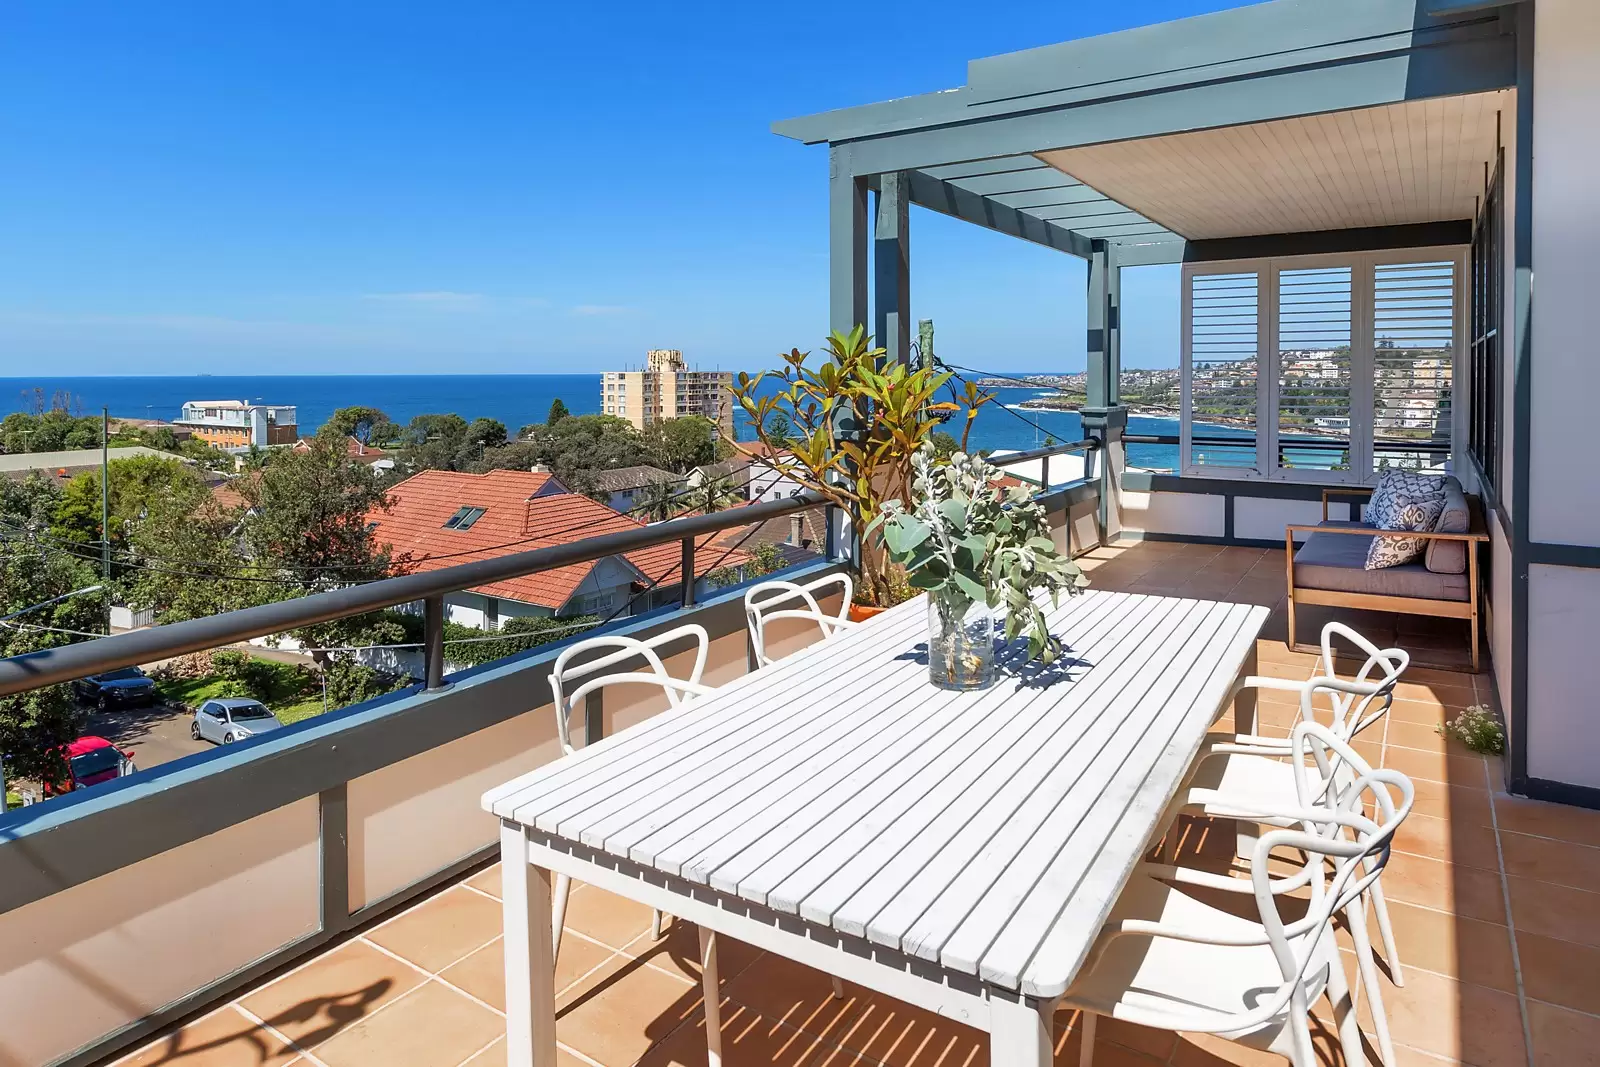 Photo #5: 82 Beach Street, Coogee - Sold by Sydney Sotheby's International Realty